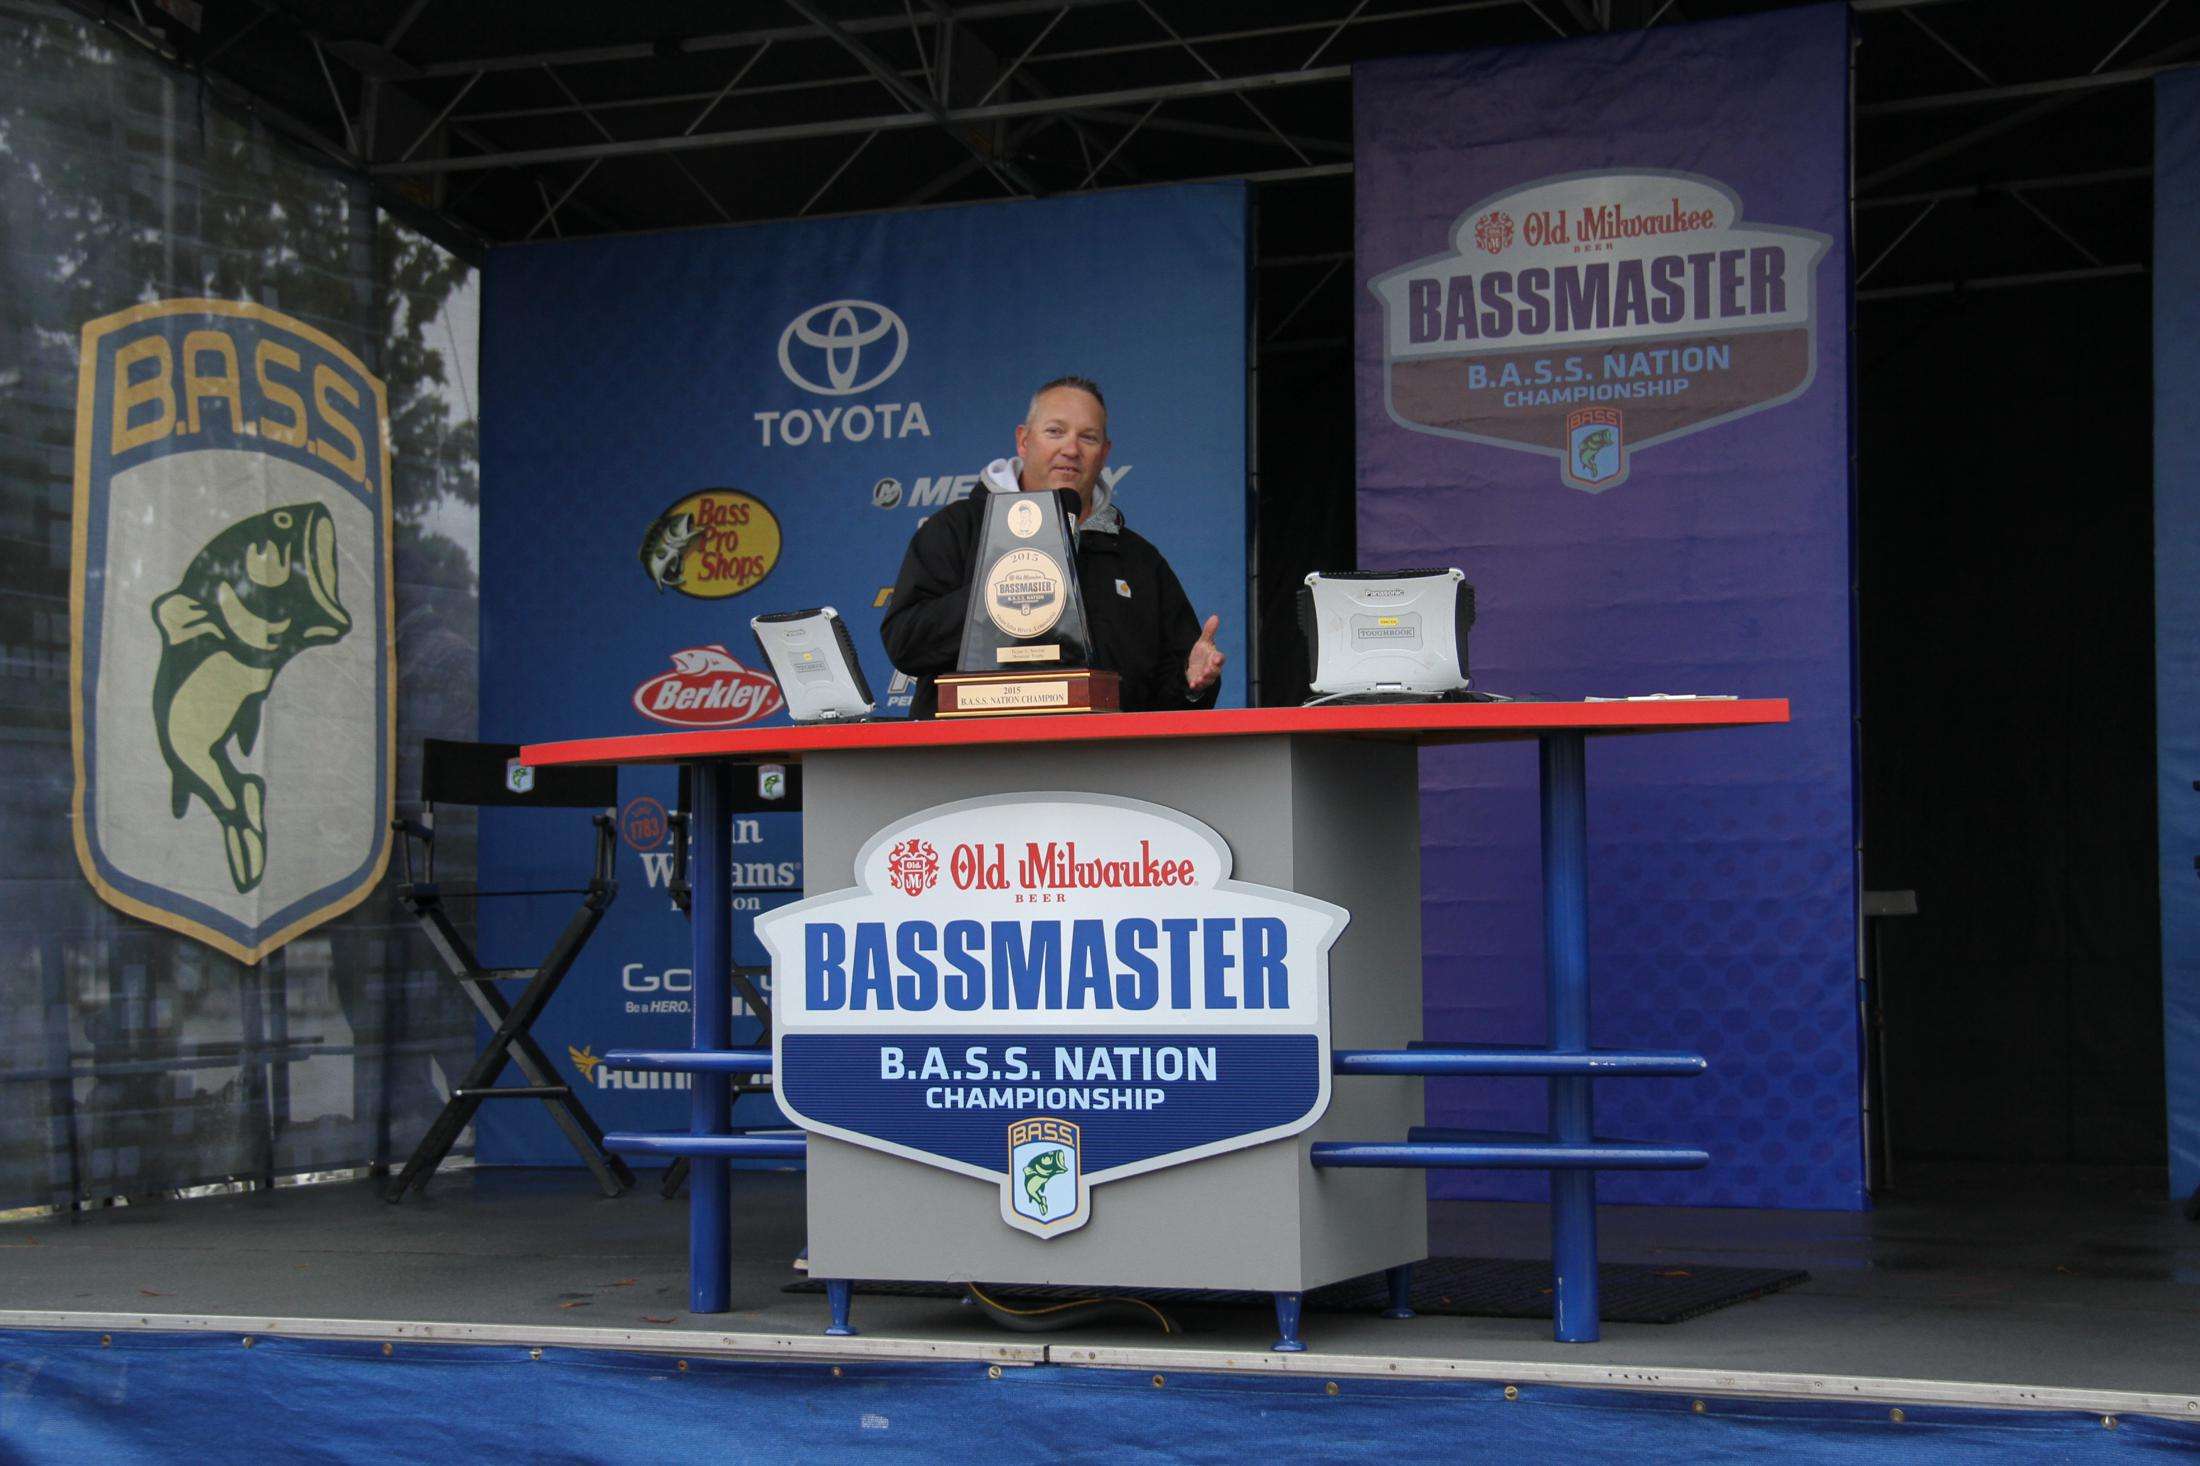 Jon Stewart gets things kicked off, and explains how each Division winner earns a berth to the 2016 Geico Bassmaster Classic presented by GoPro.